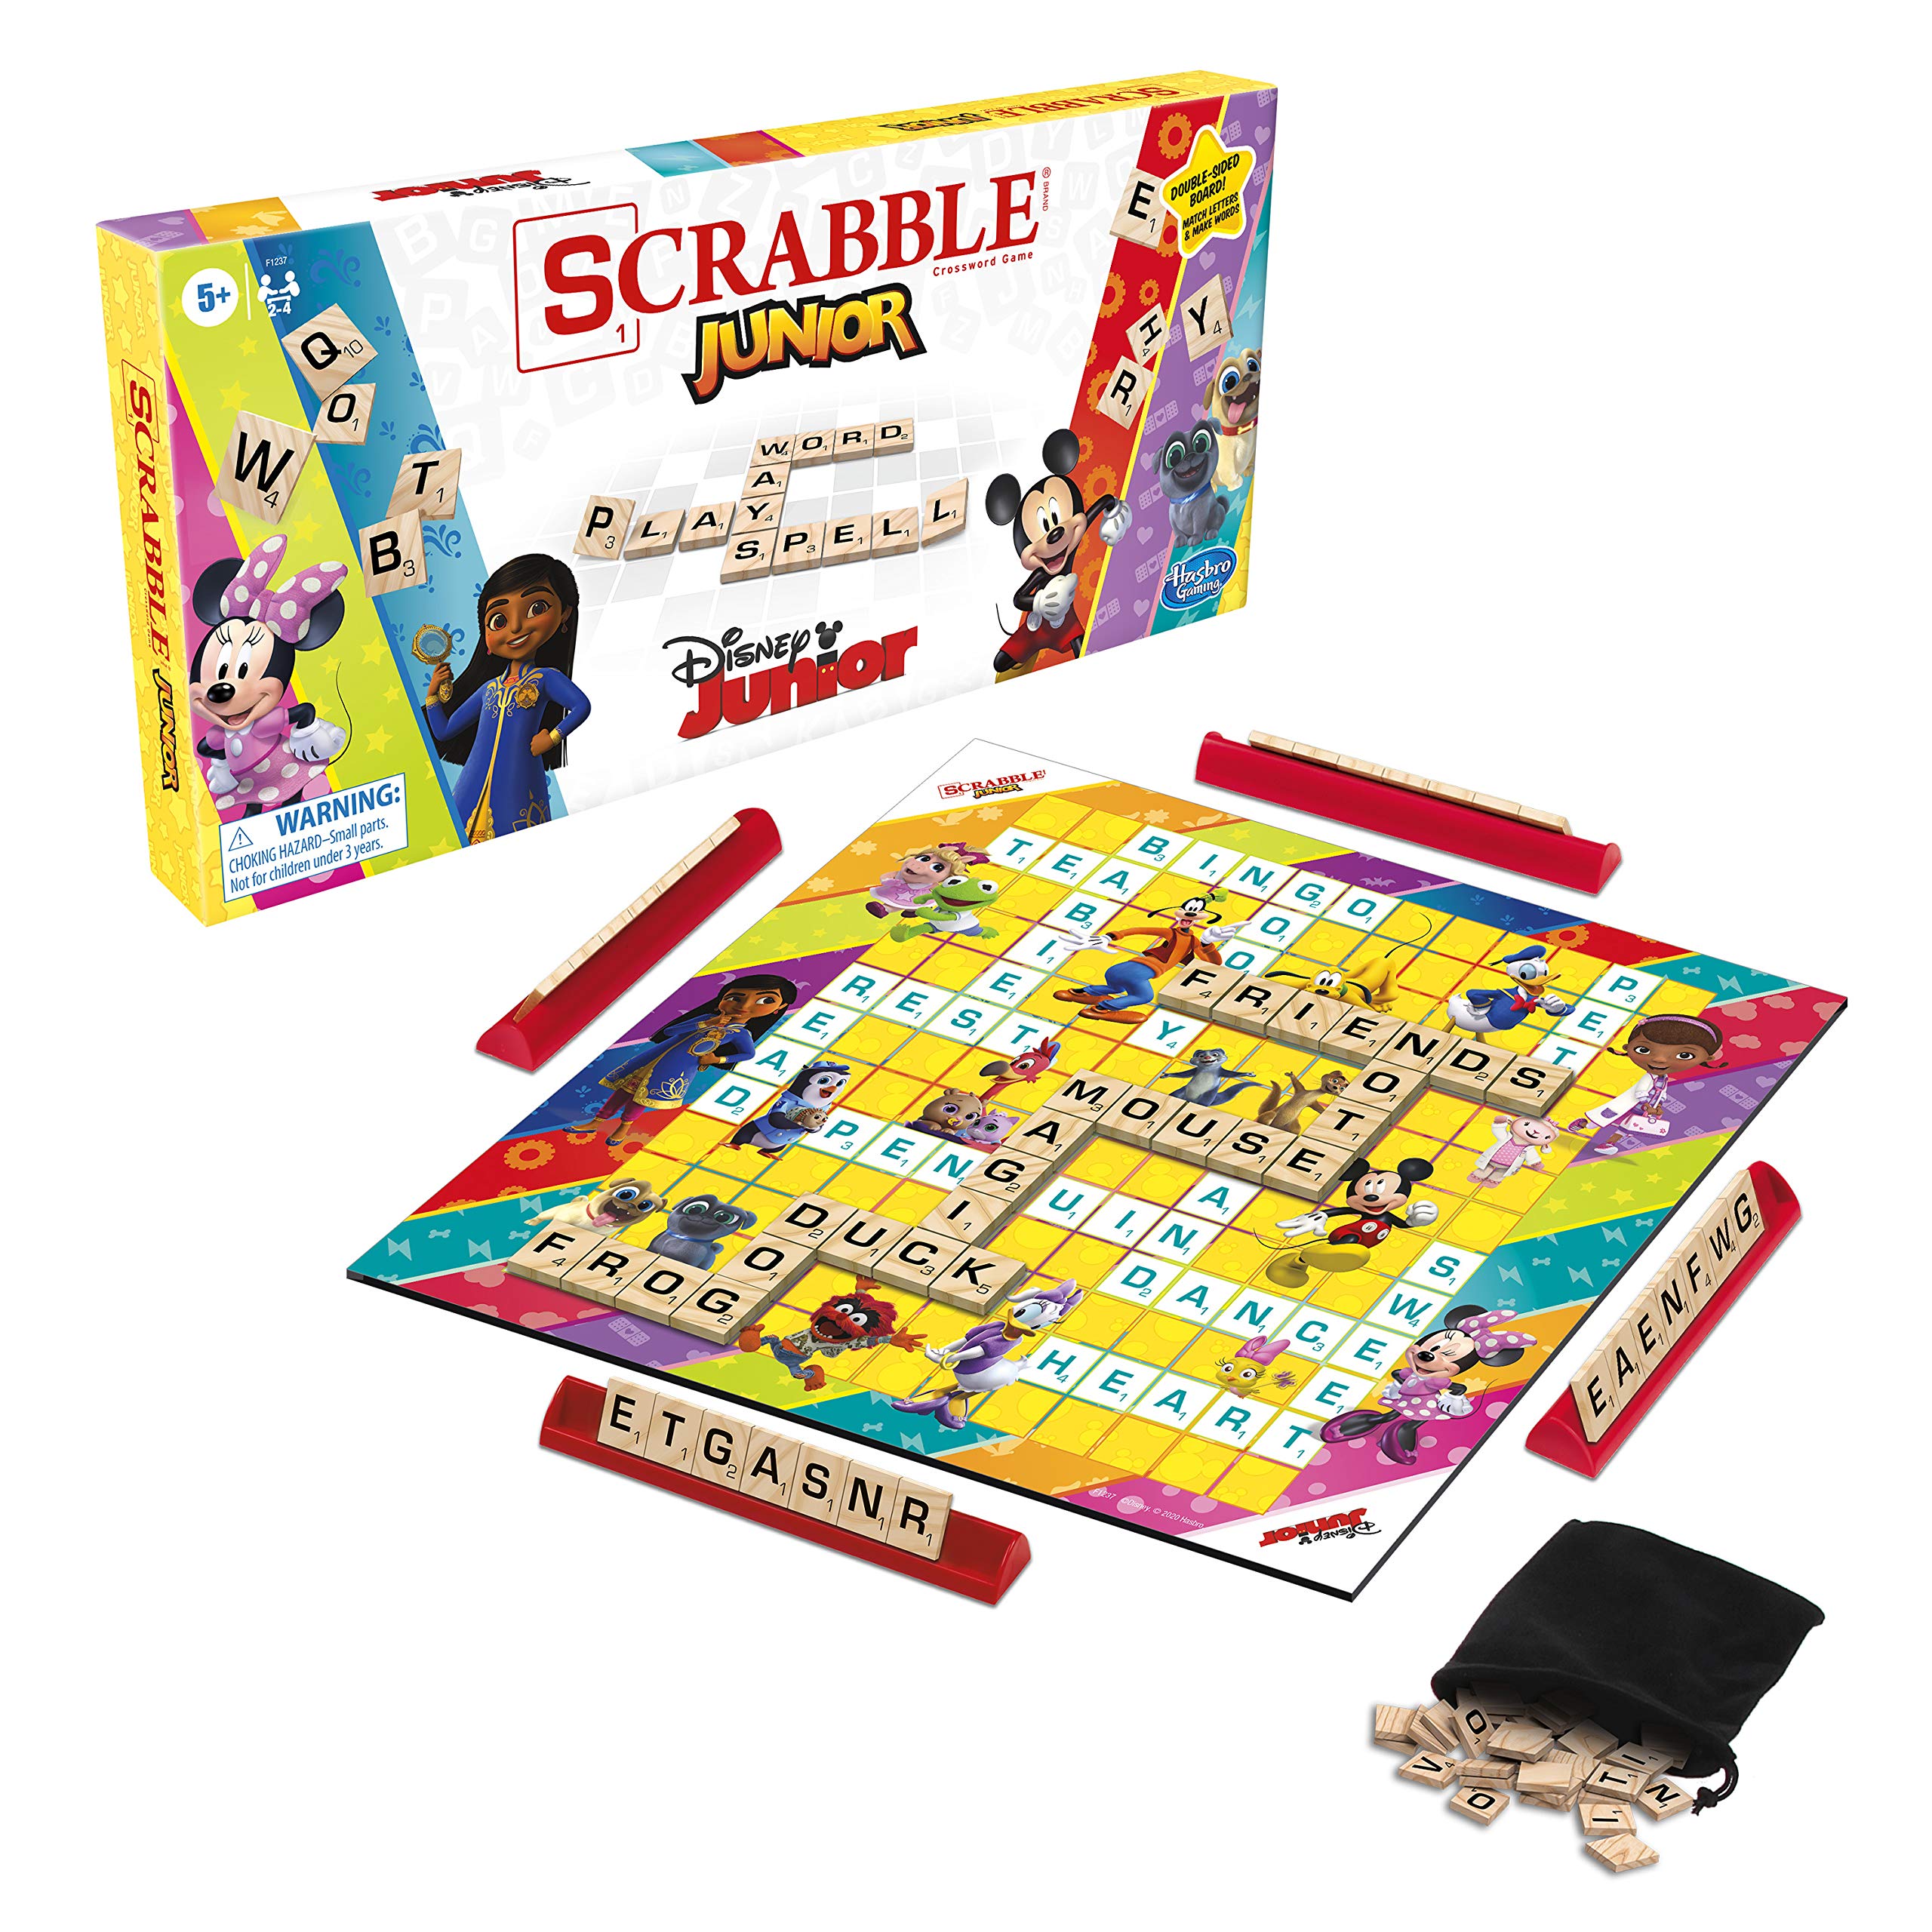 Scrabble Junior: Disney Junior Edition Board Game, Double -Sided Game Board, Matching and Word Game (Amazon Exclusive)